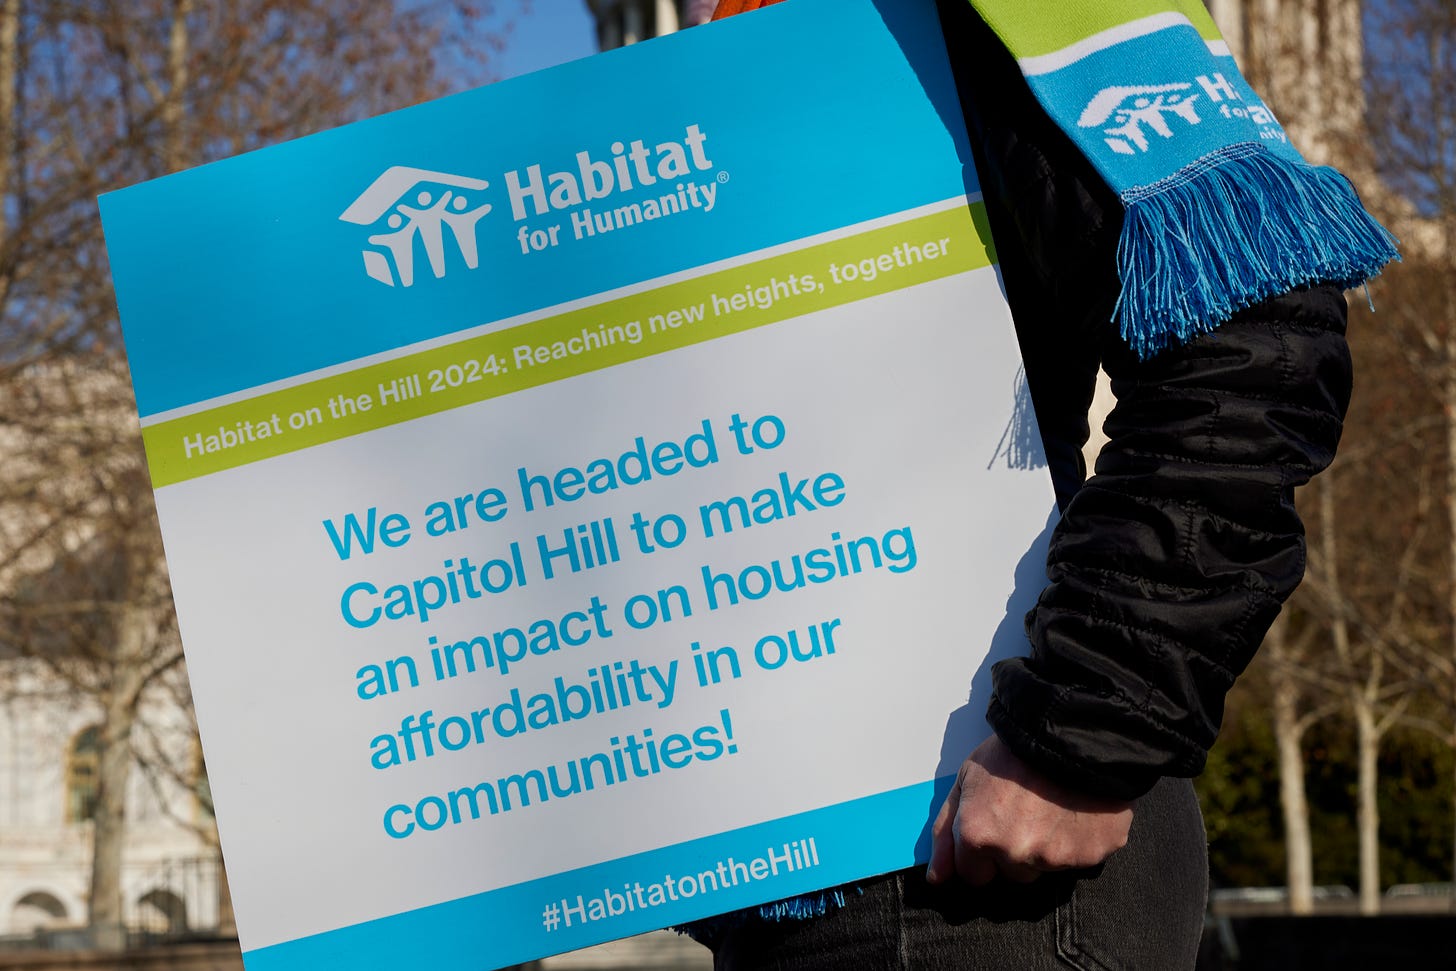 Sign that says "We are headed to Capitol Hill to make an impact on housing affordability in our communities". 